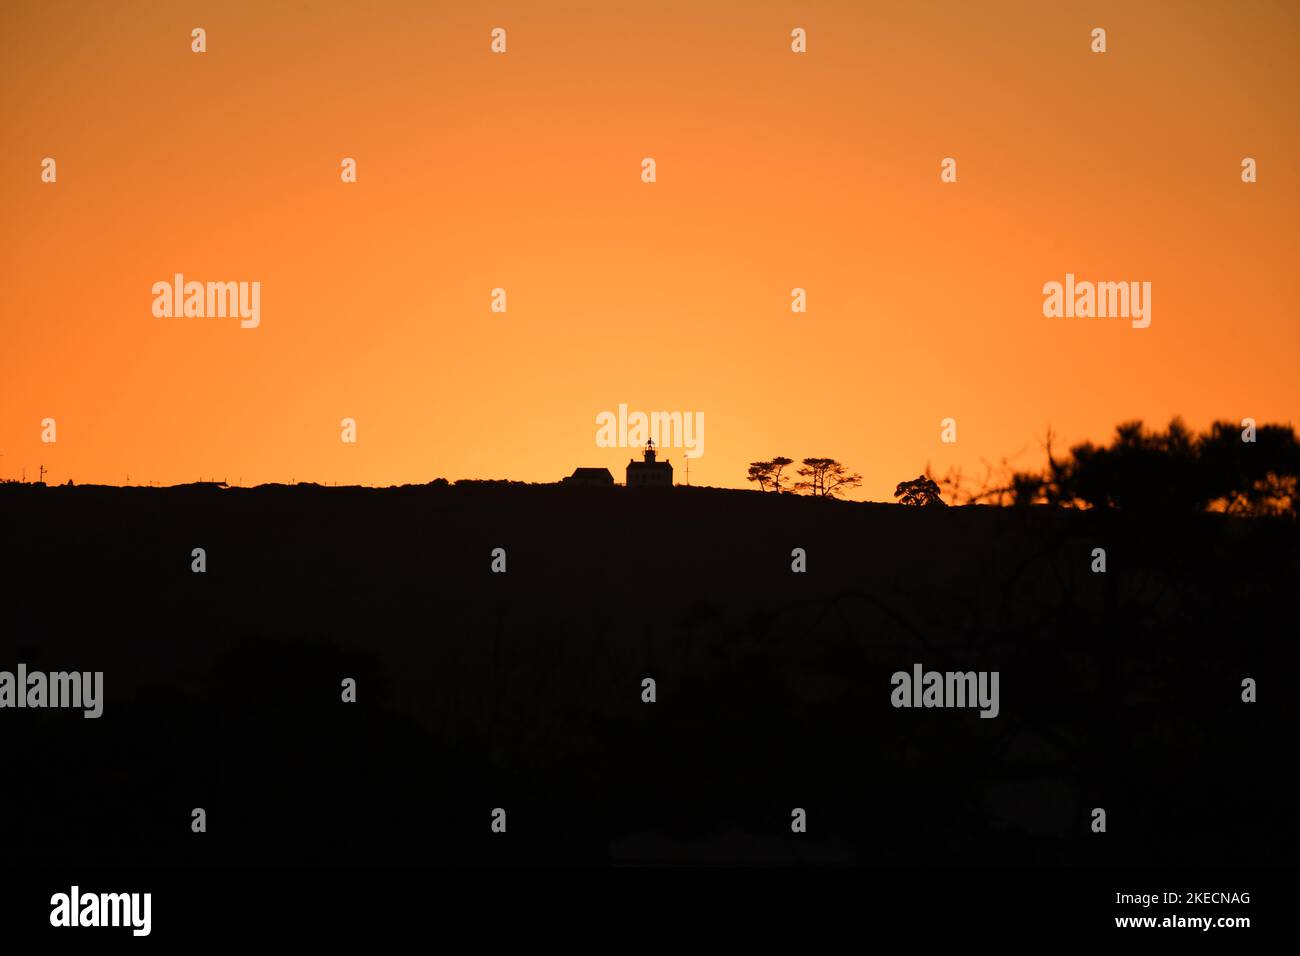 Cabrillo National Monument, located on Point Loma in San Diego, California,  at sunset as seen from Coronado, California Stock Photo